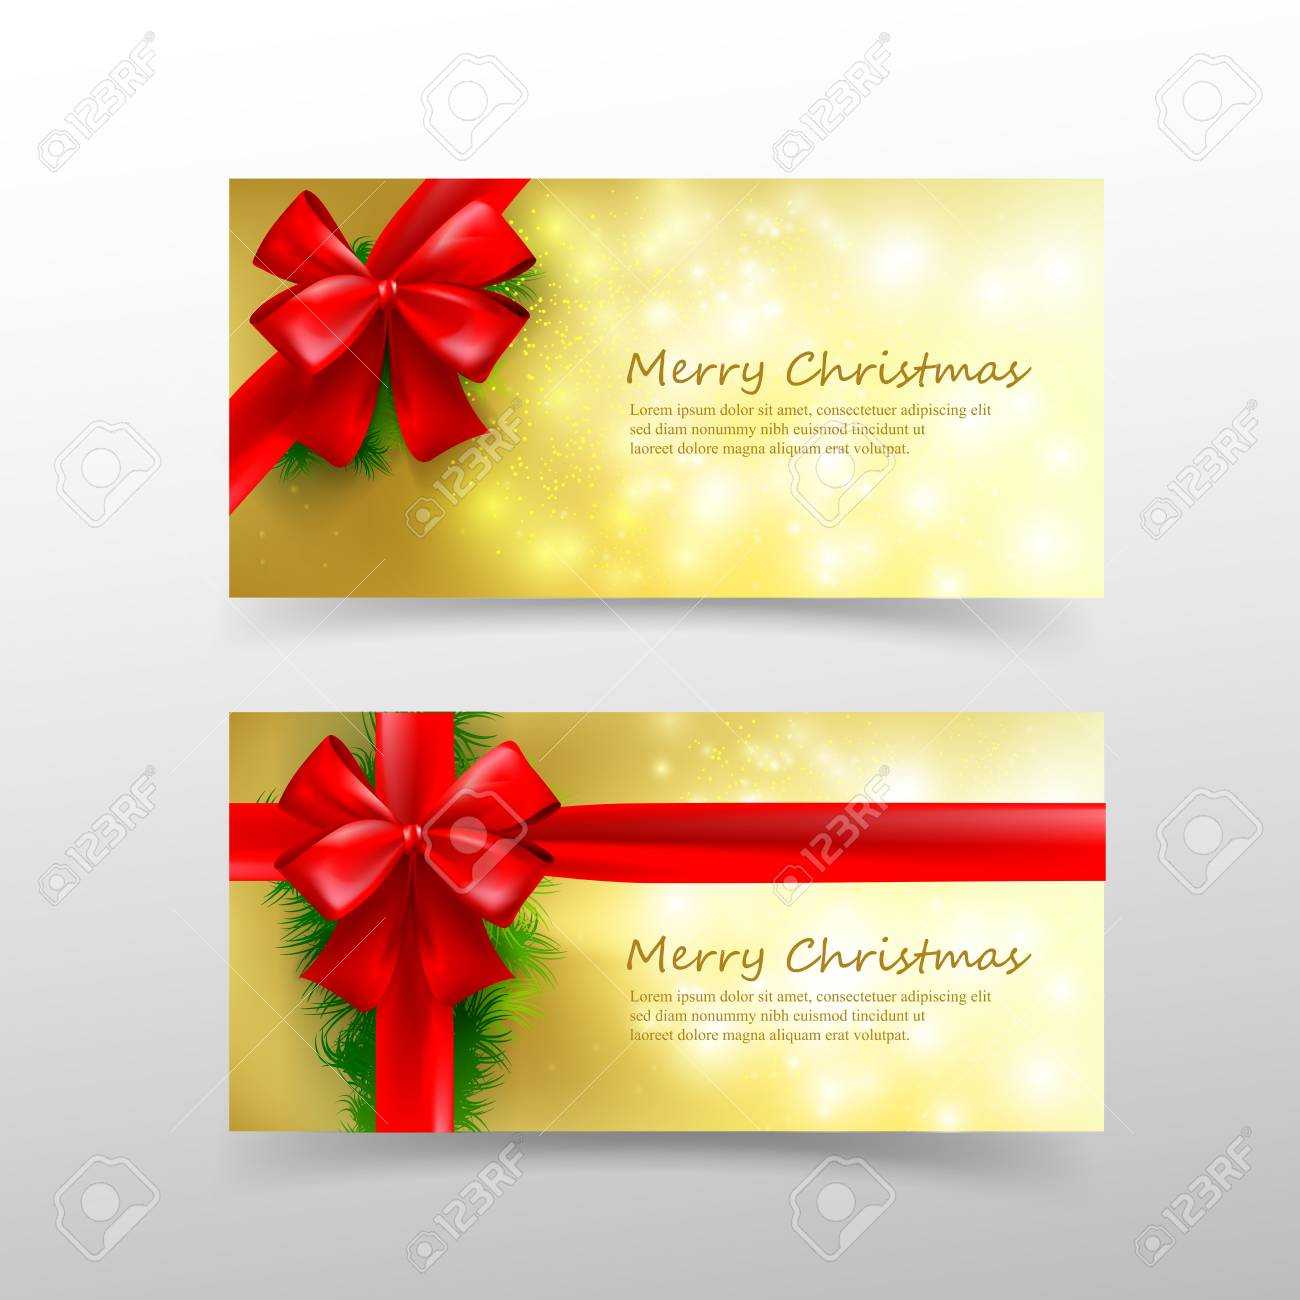 Christmas Card Template For Invitation And Gift Voucher With.. With Regard To Present Card Template